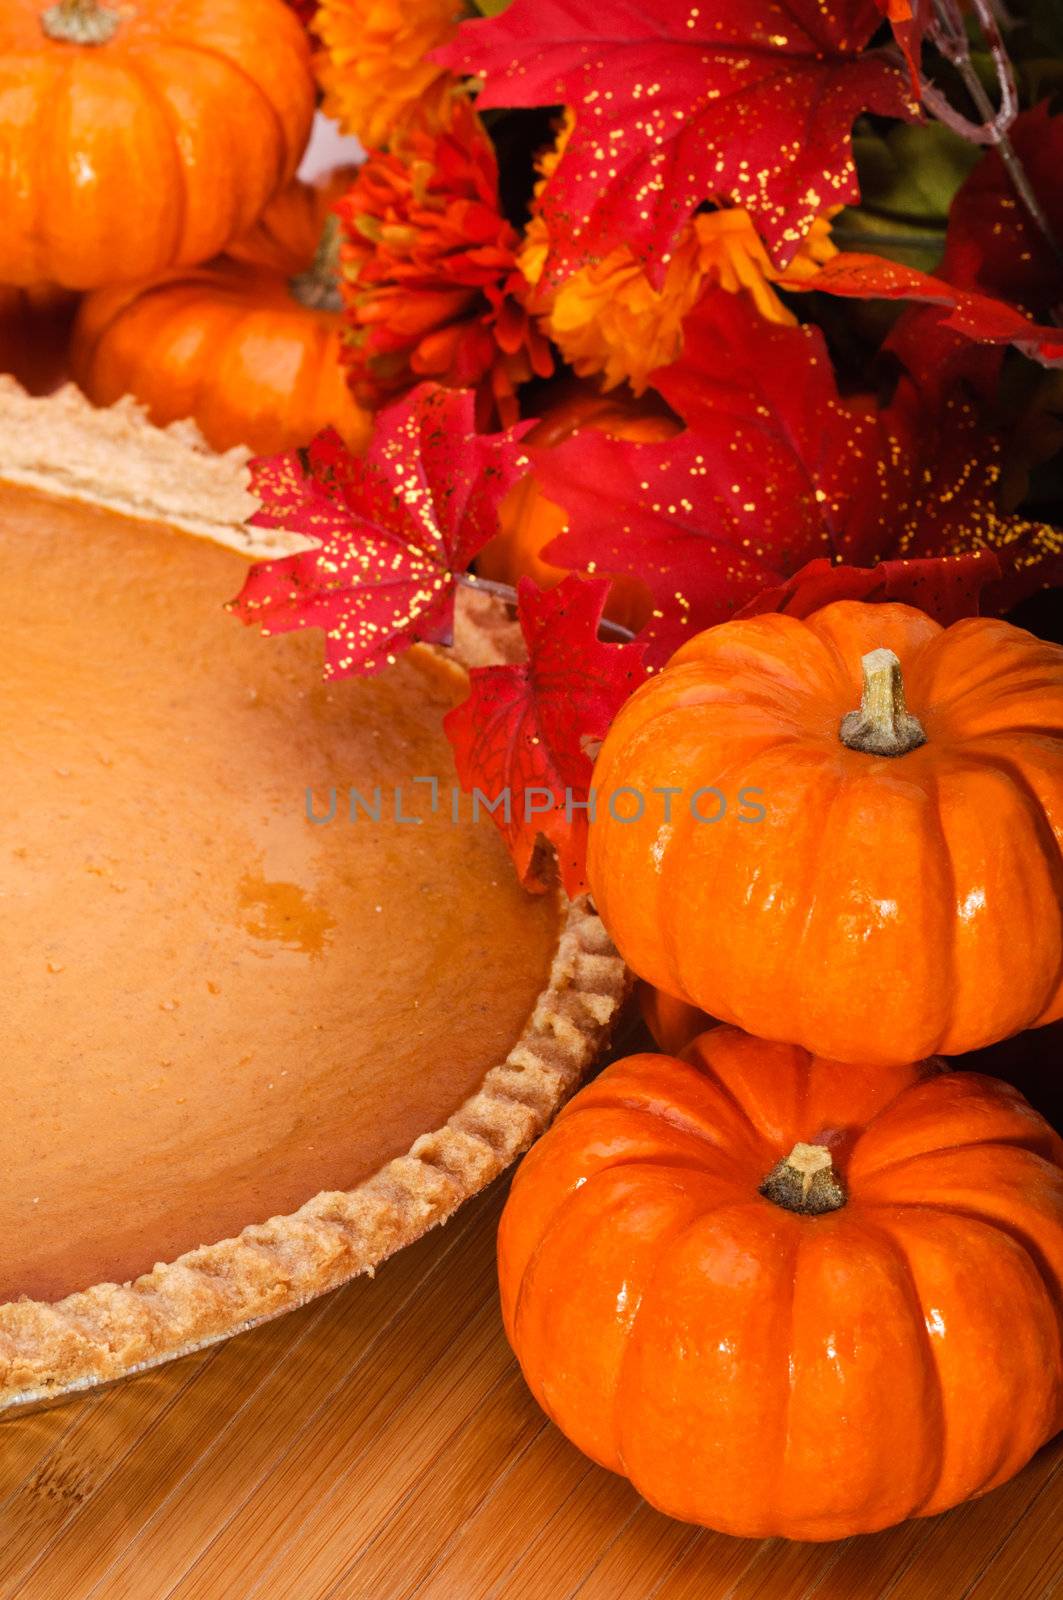 Pumpkin pie in a pie plate with autumn leaves and pumpkins.